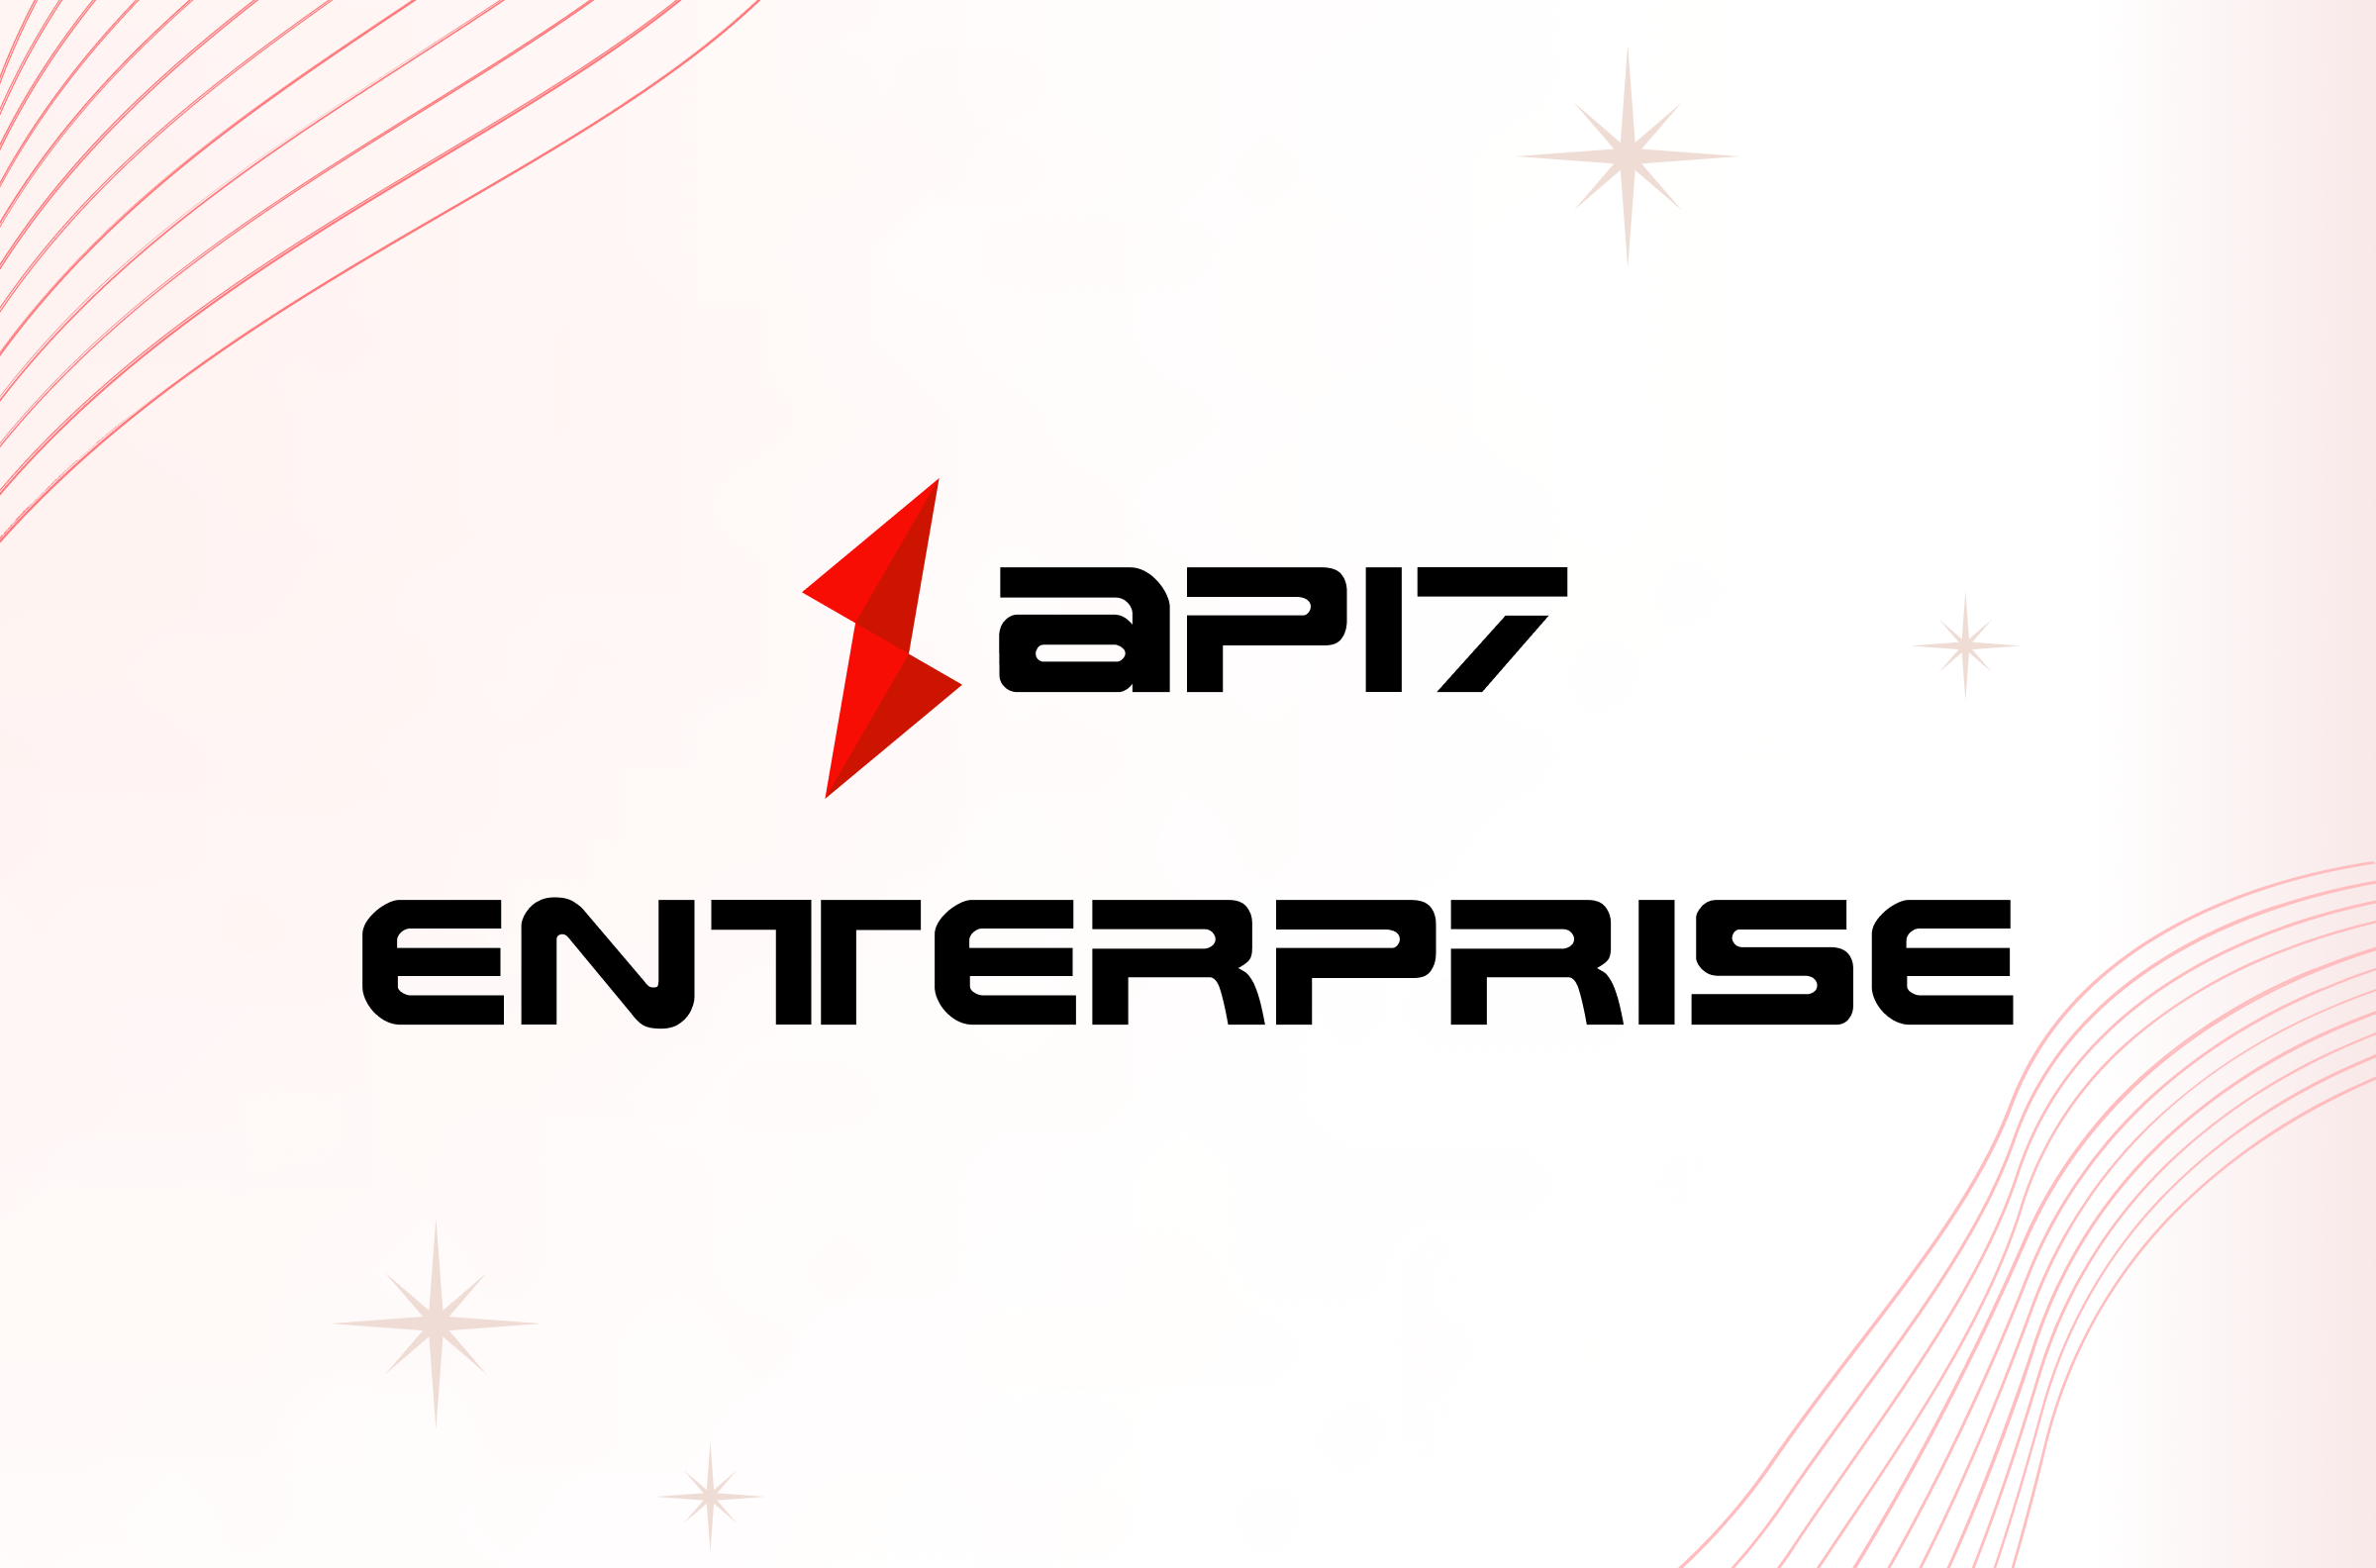 Fortify Your Data Security: API7 Enterprise with FIPS Integration